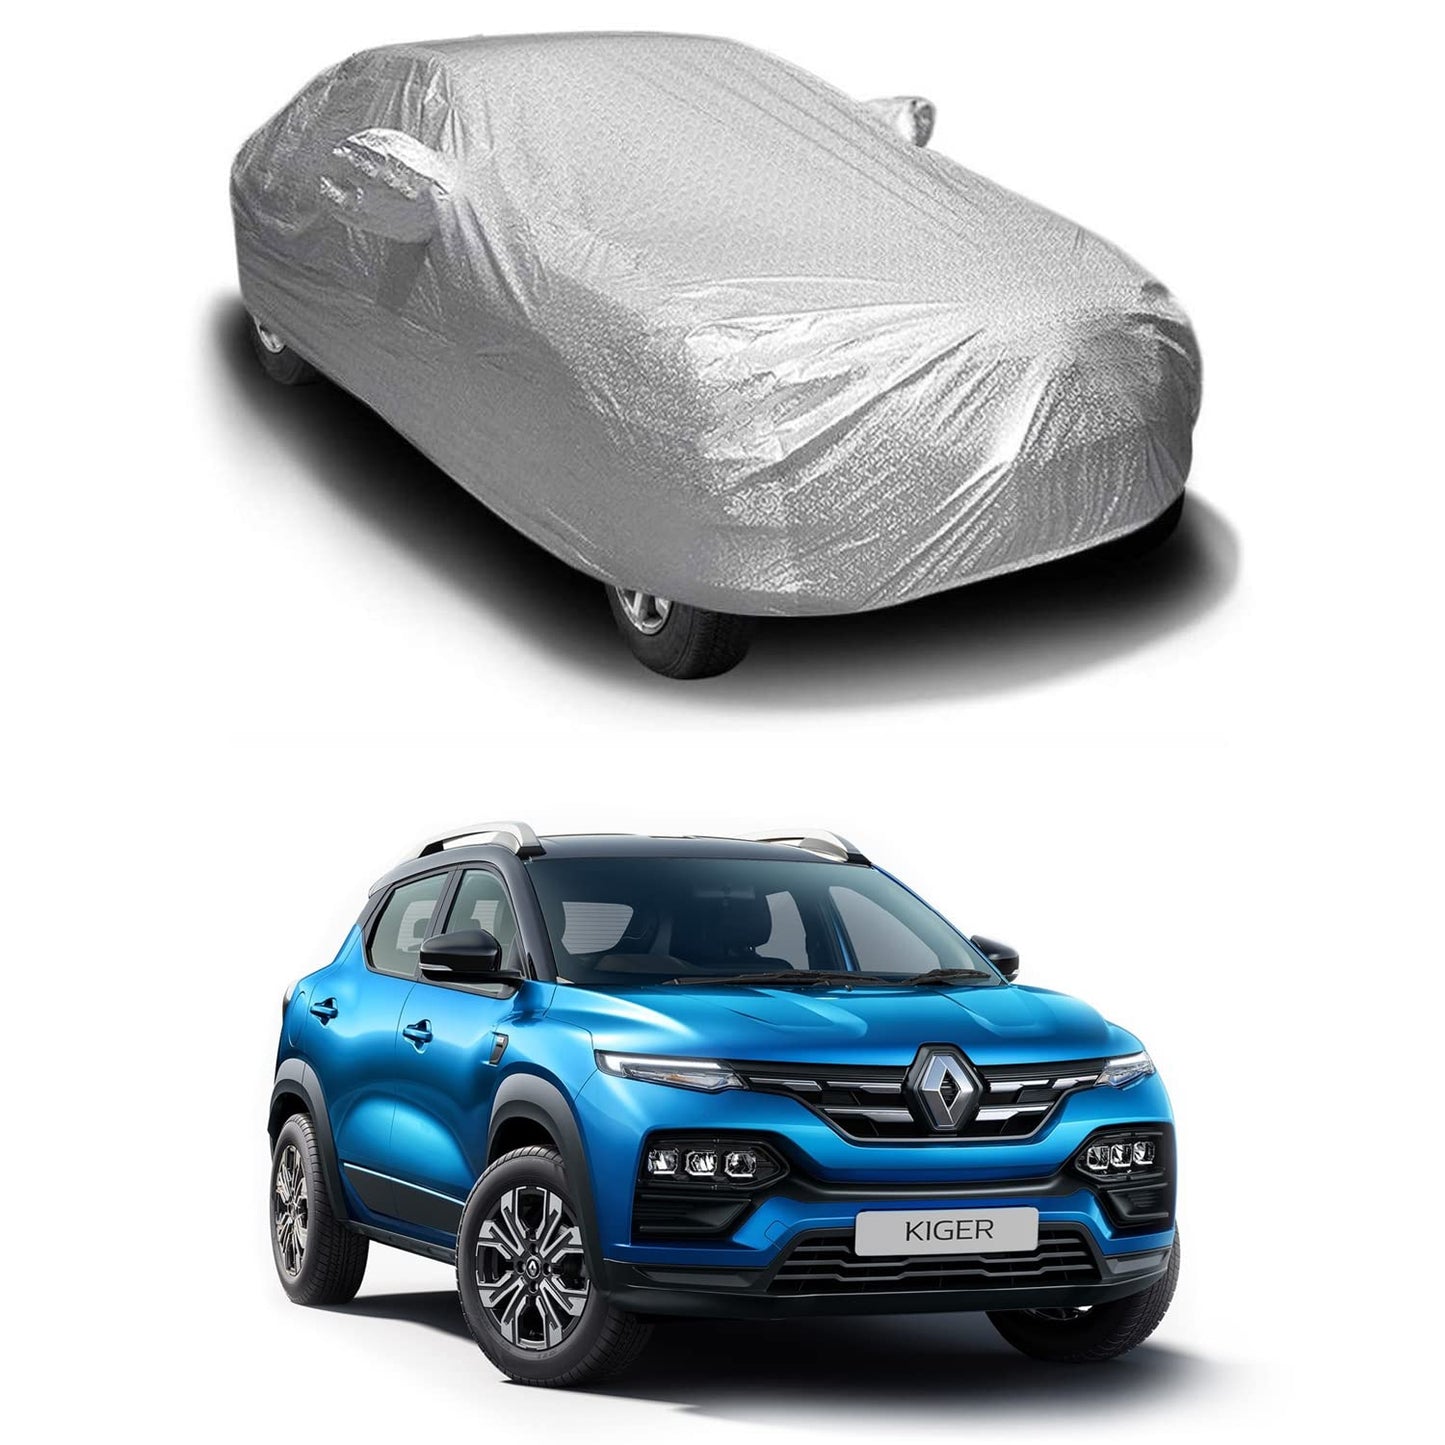 Oshotto Spyro Silver Anti Reflective, dustproof and Water Proof Car Body Cover with Mirror Pockets For Renault Kiger